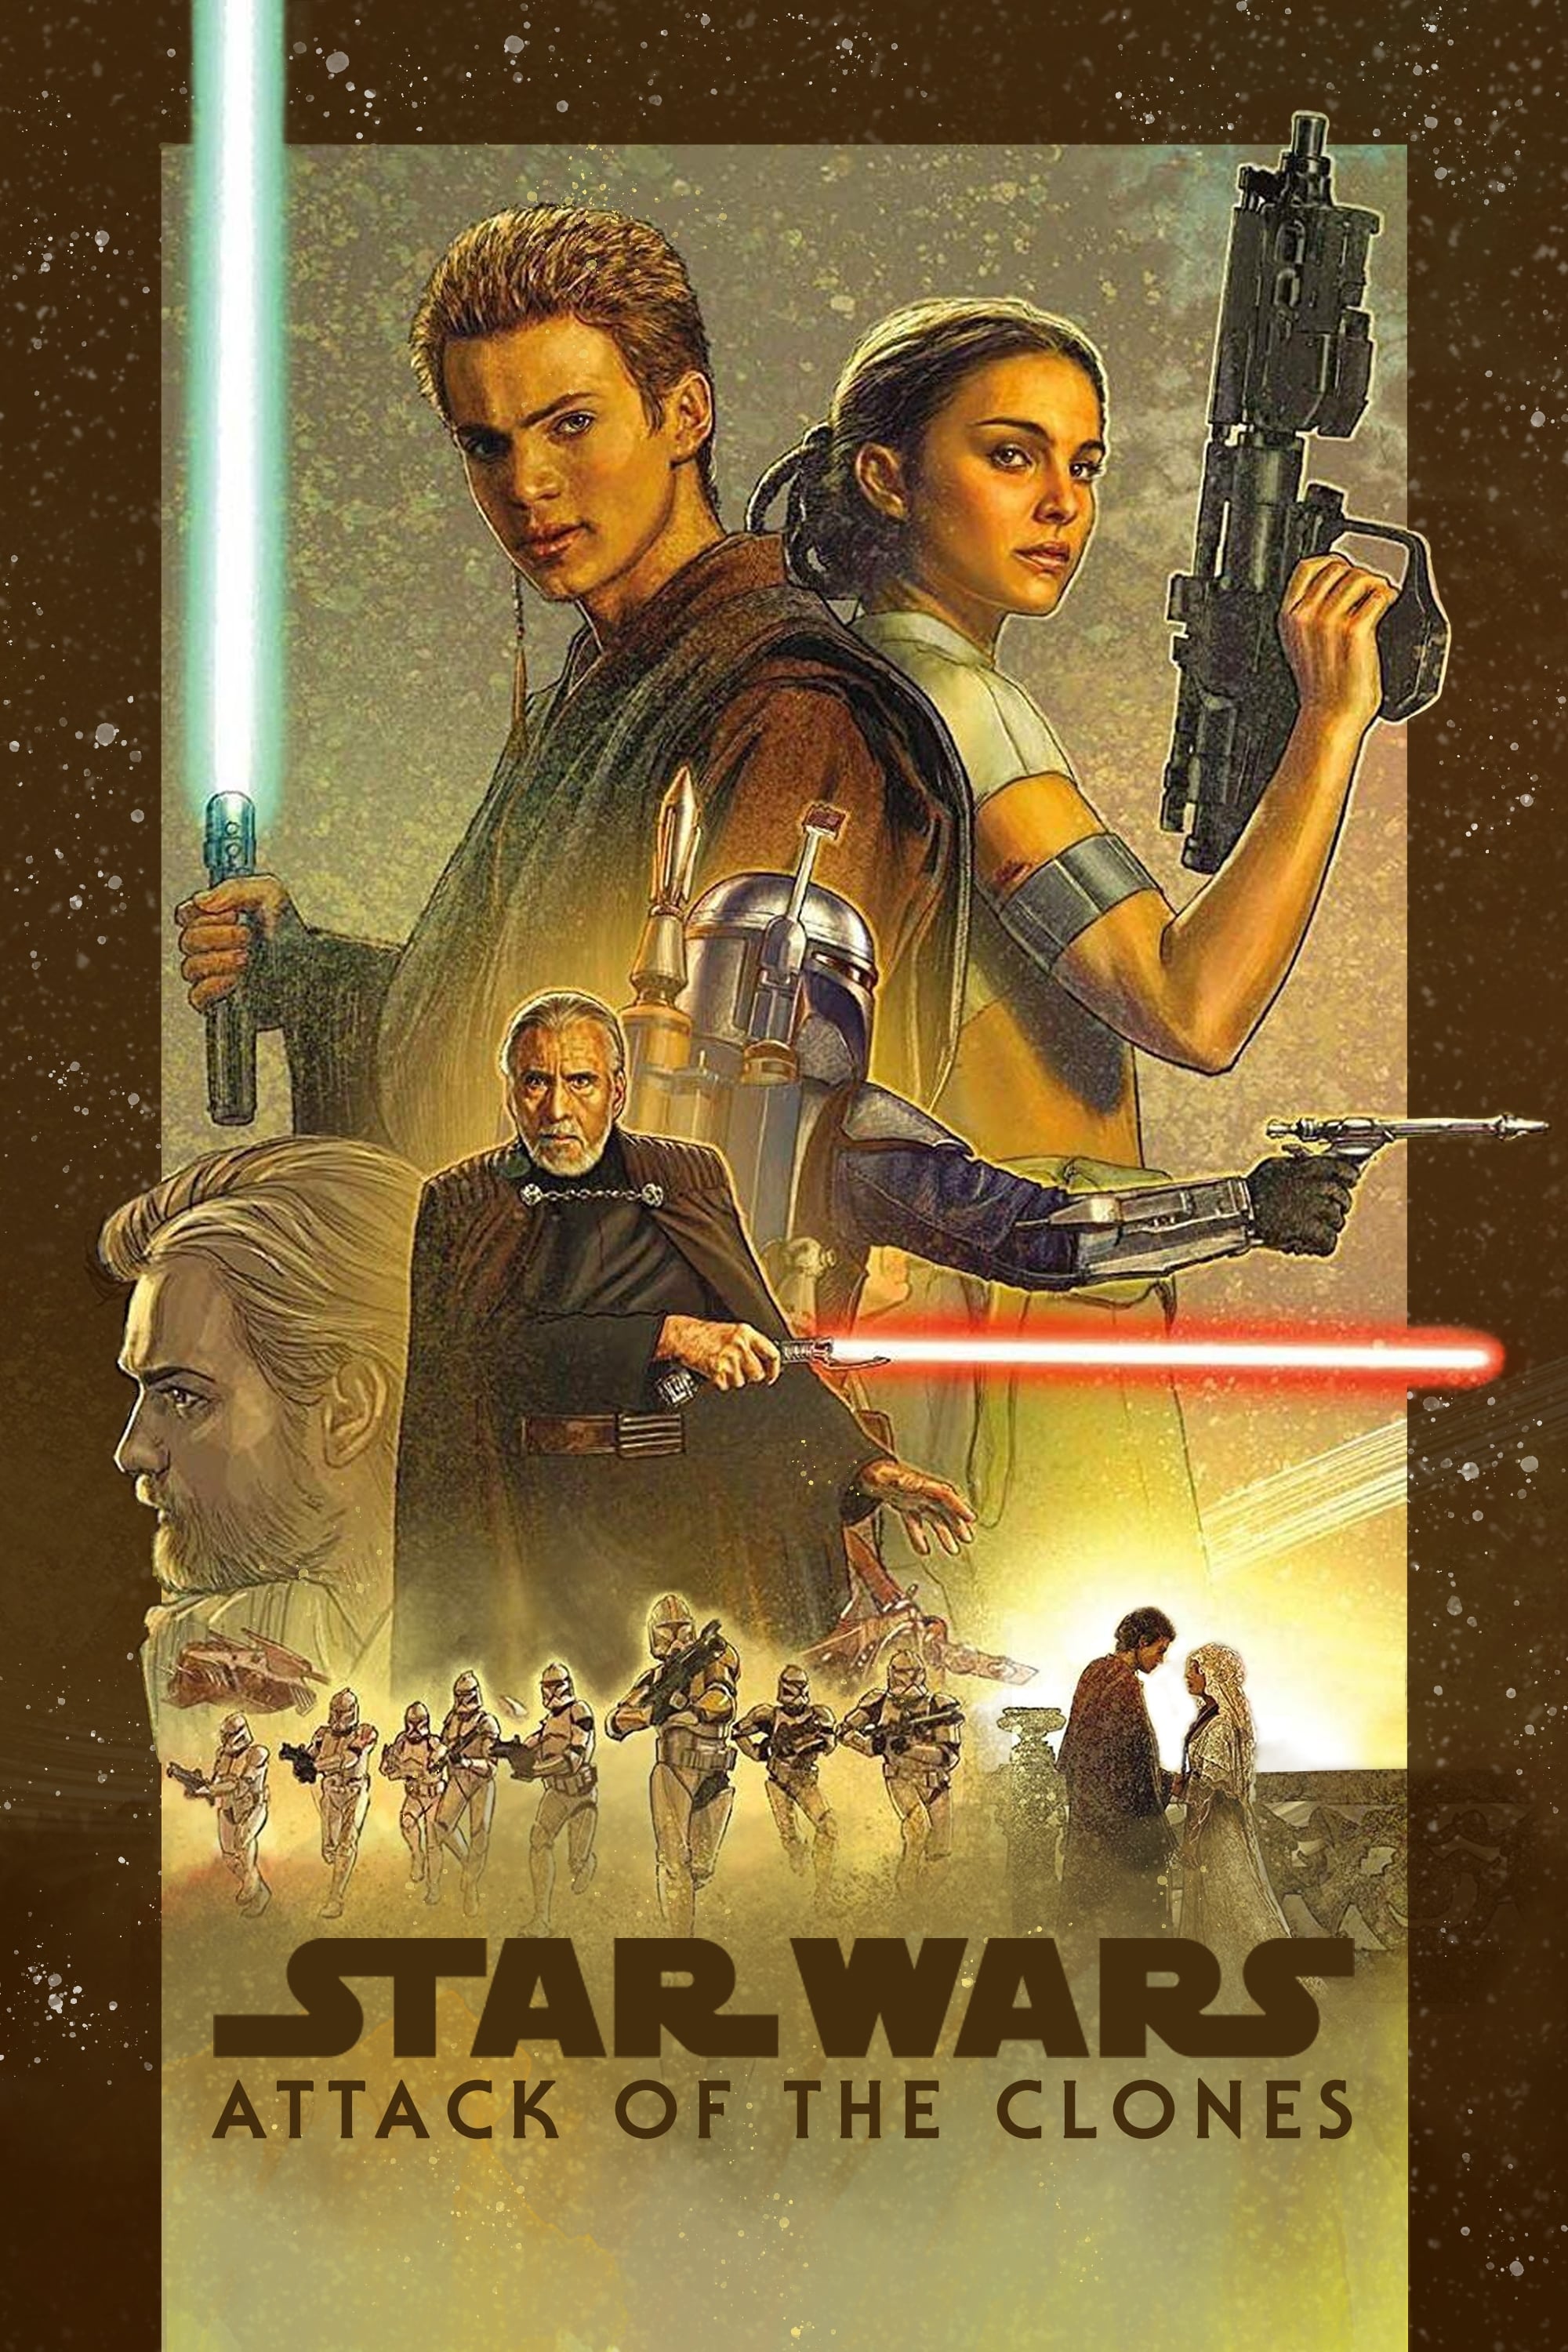 Star Wars: Episode II - Attack of the Clones (2002) - Posters — The